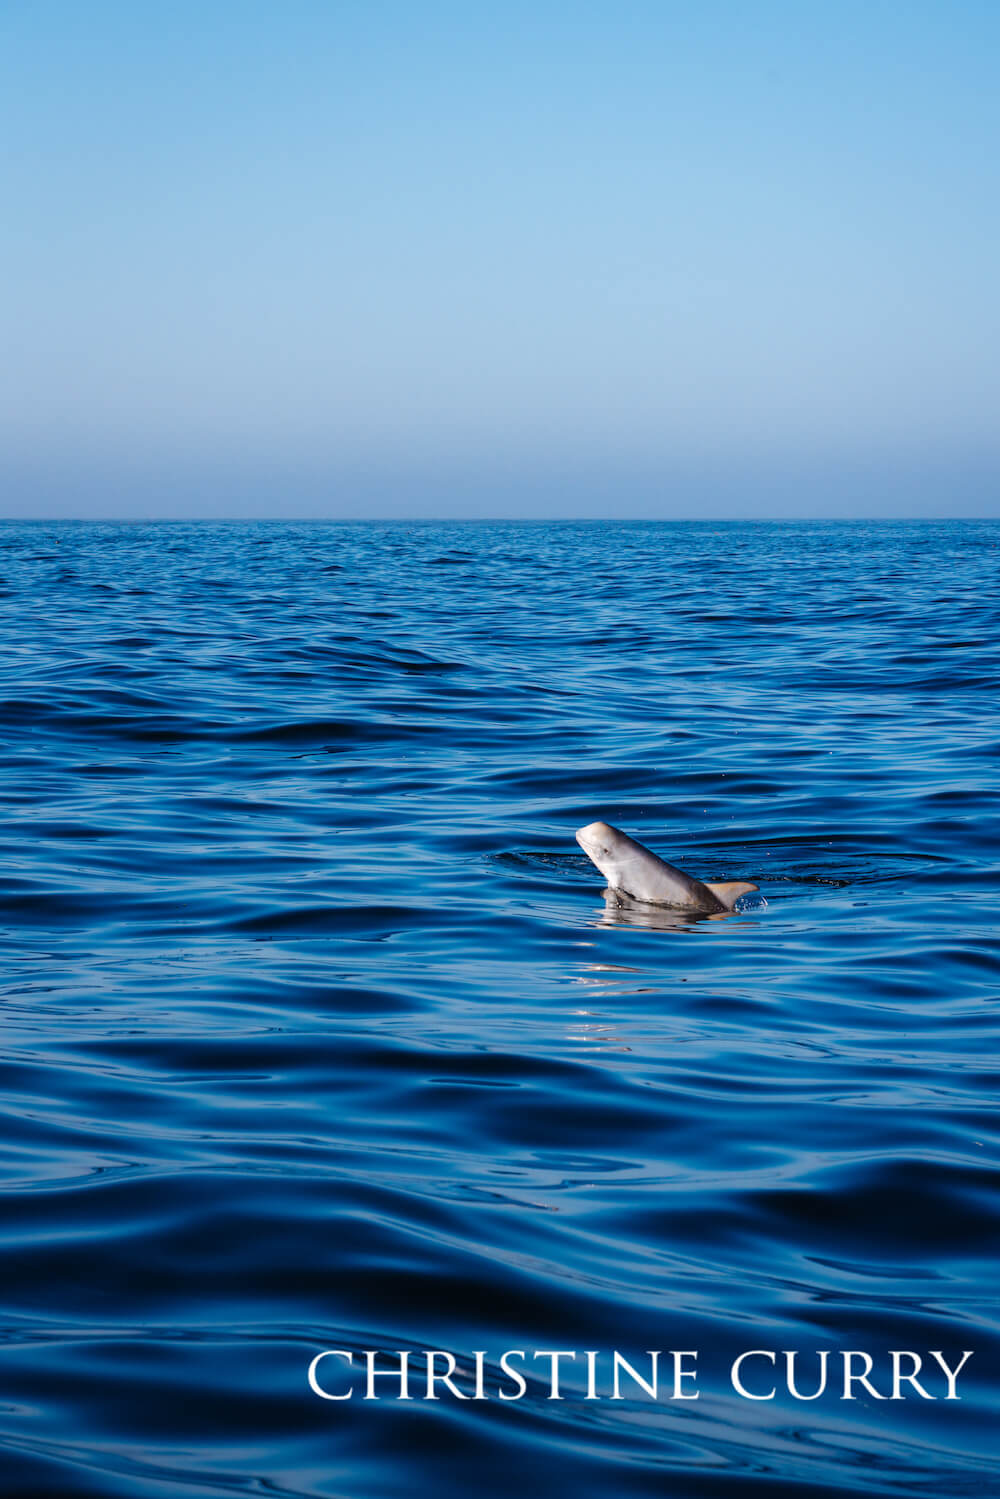 A smiling Risso's dolphin breaching the water's bright blue surface.